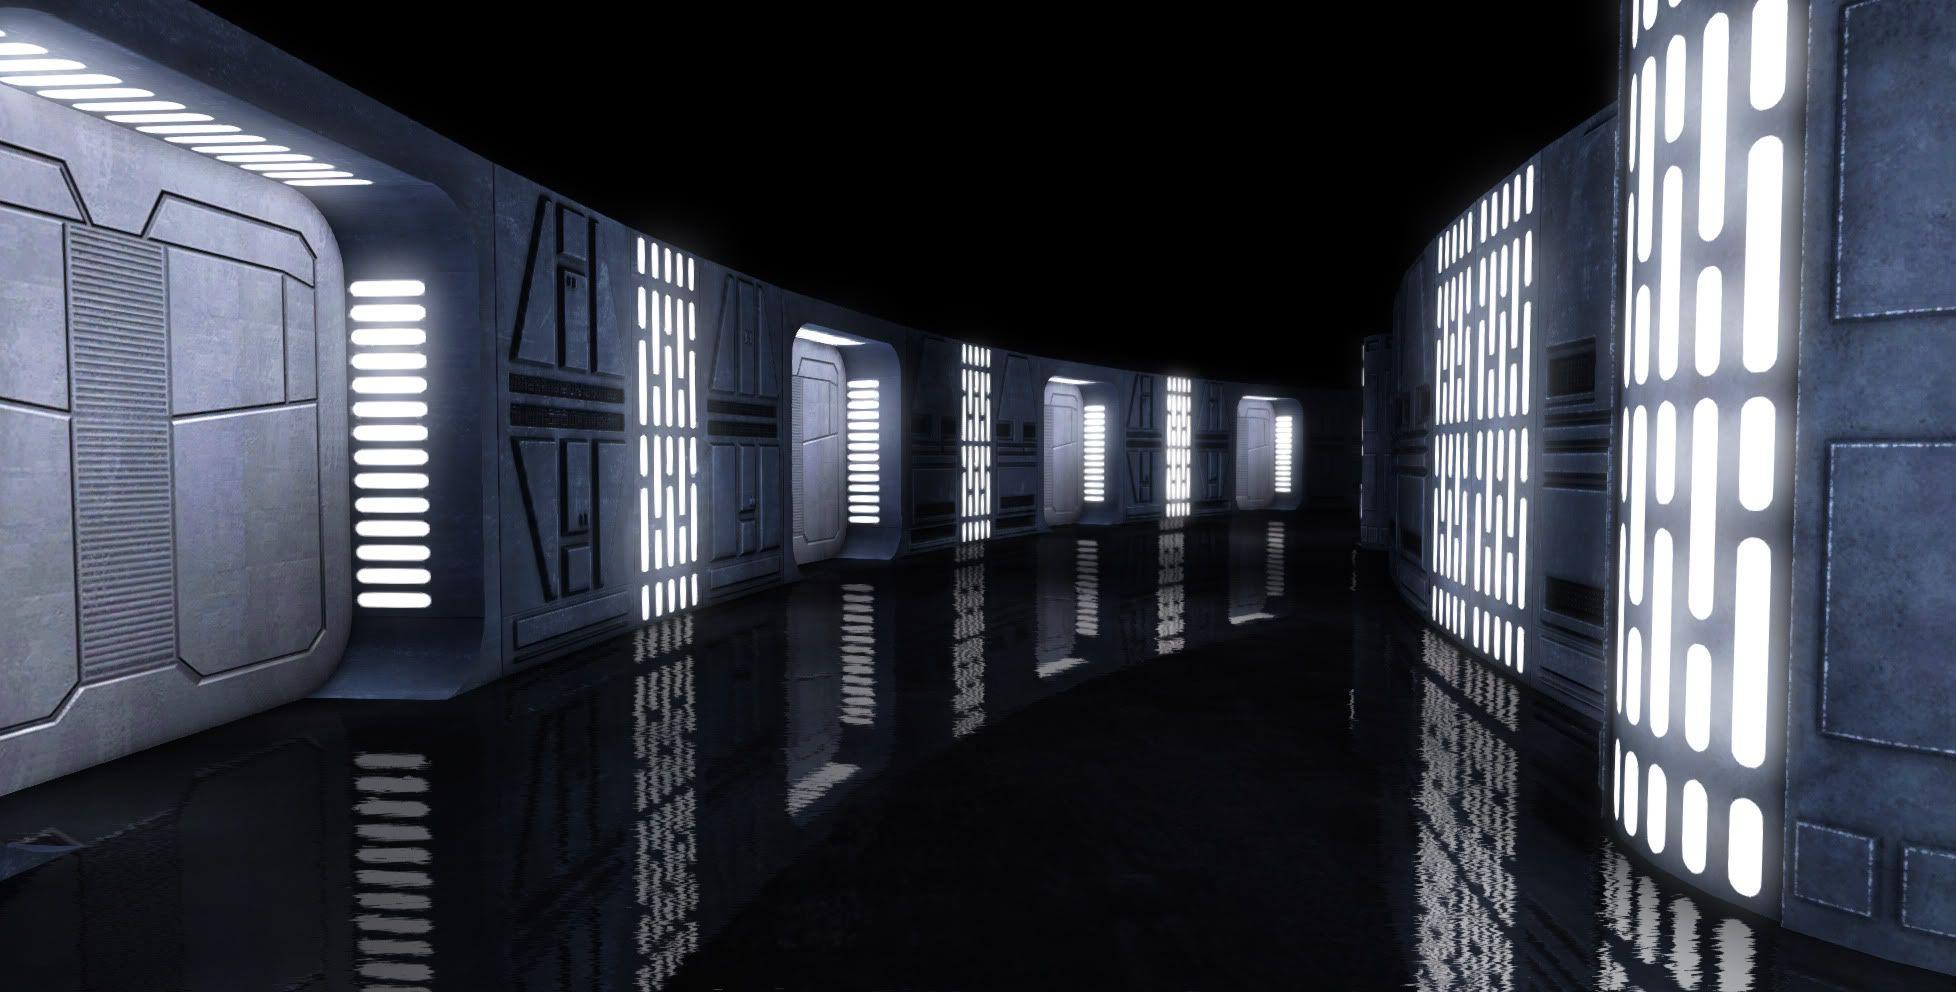 image For > Death Star Interior